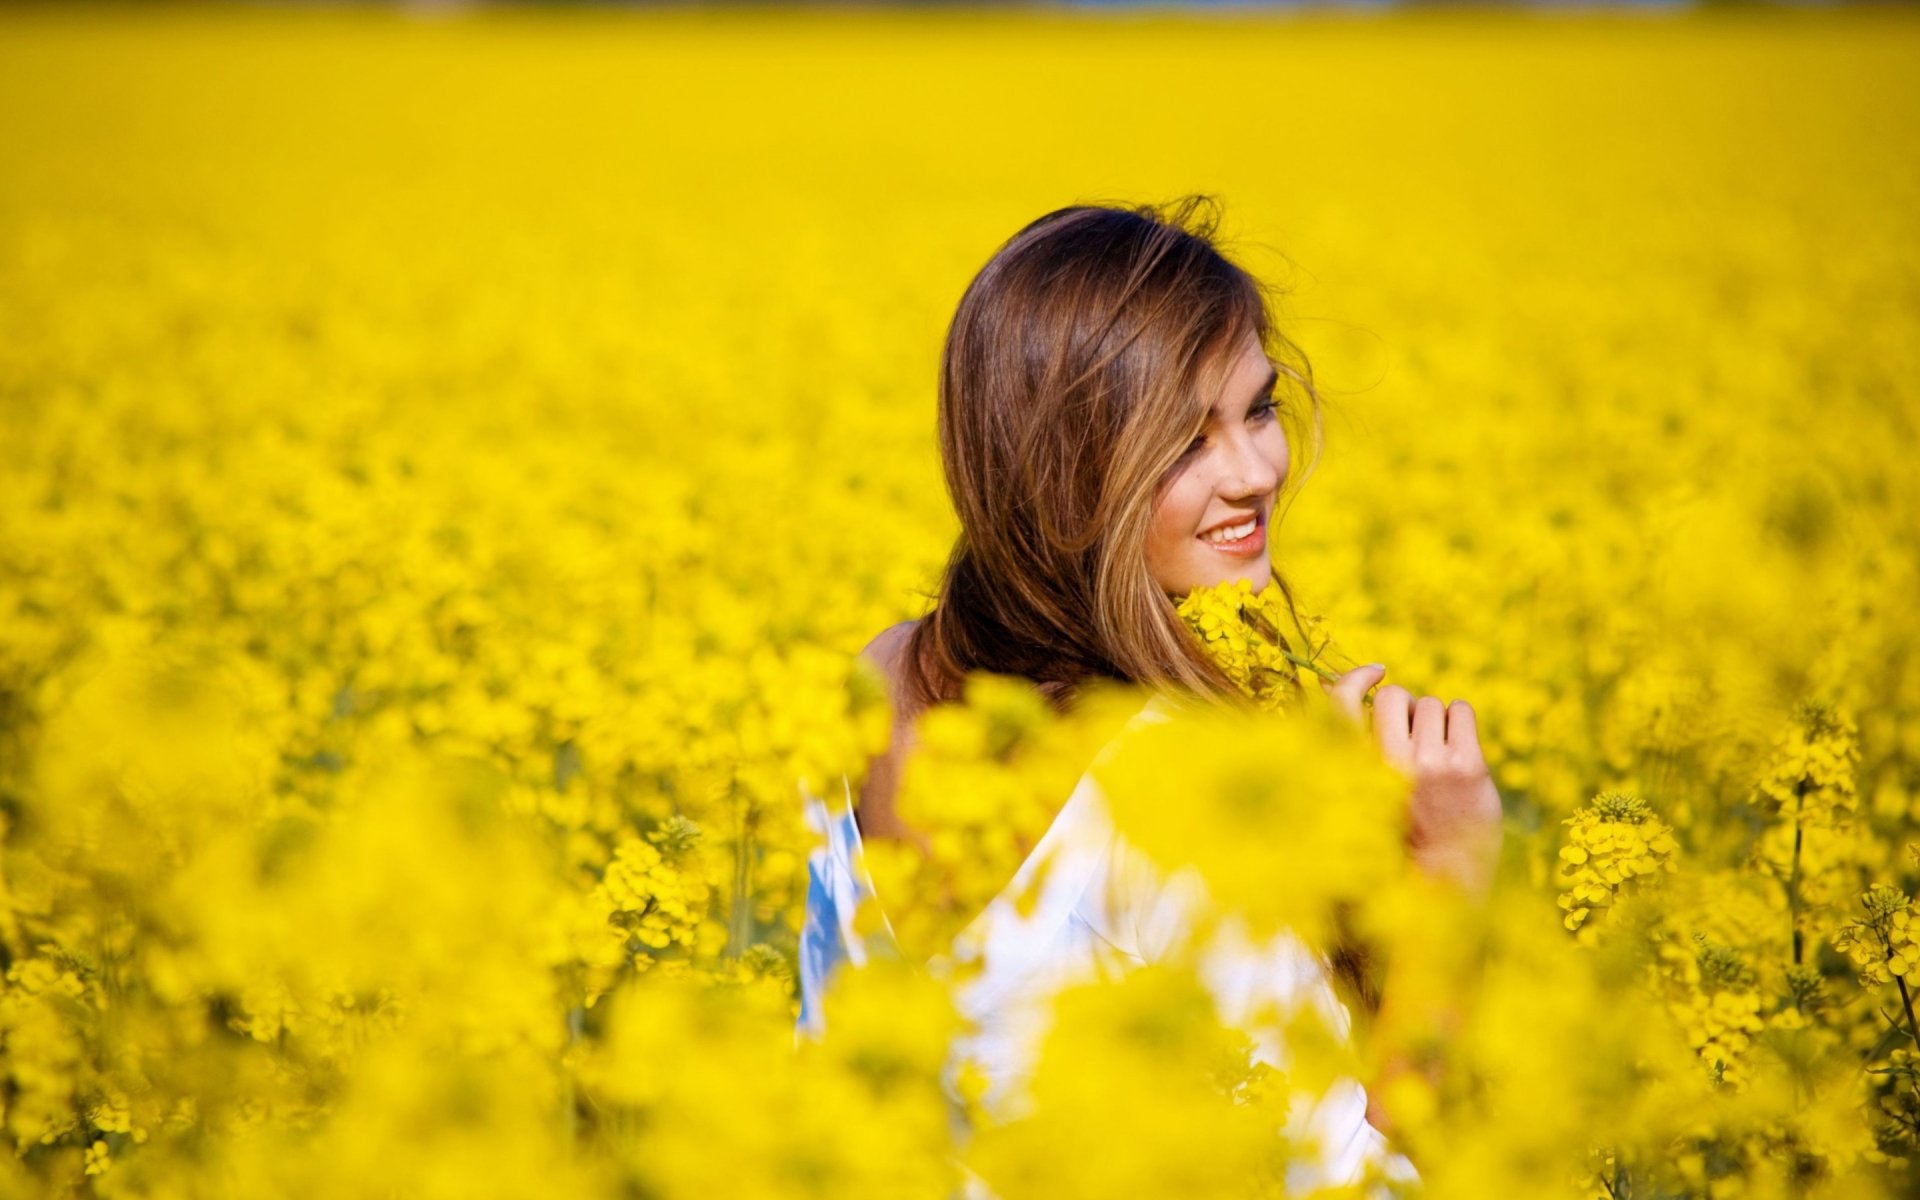 mood wallpaper download,rapeseed,people in nature,yellow,canola,mustard plant